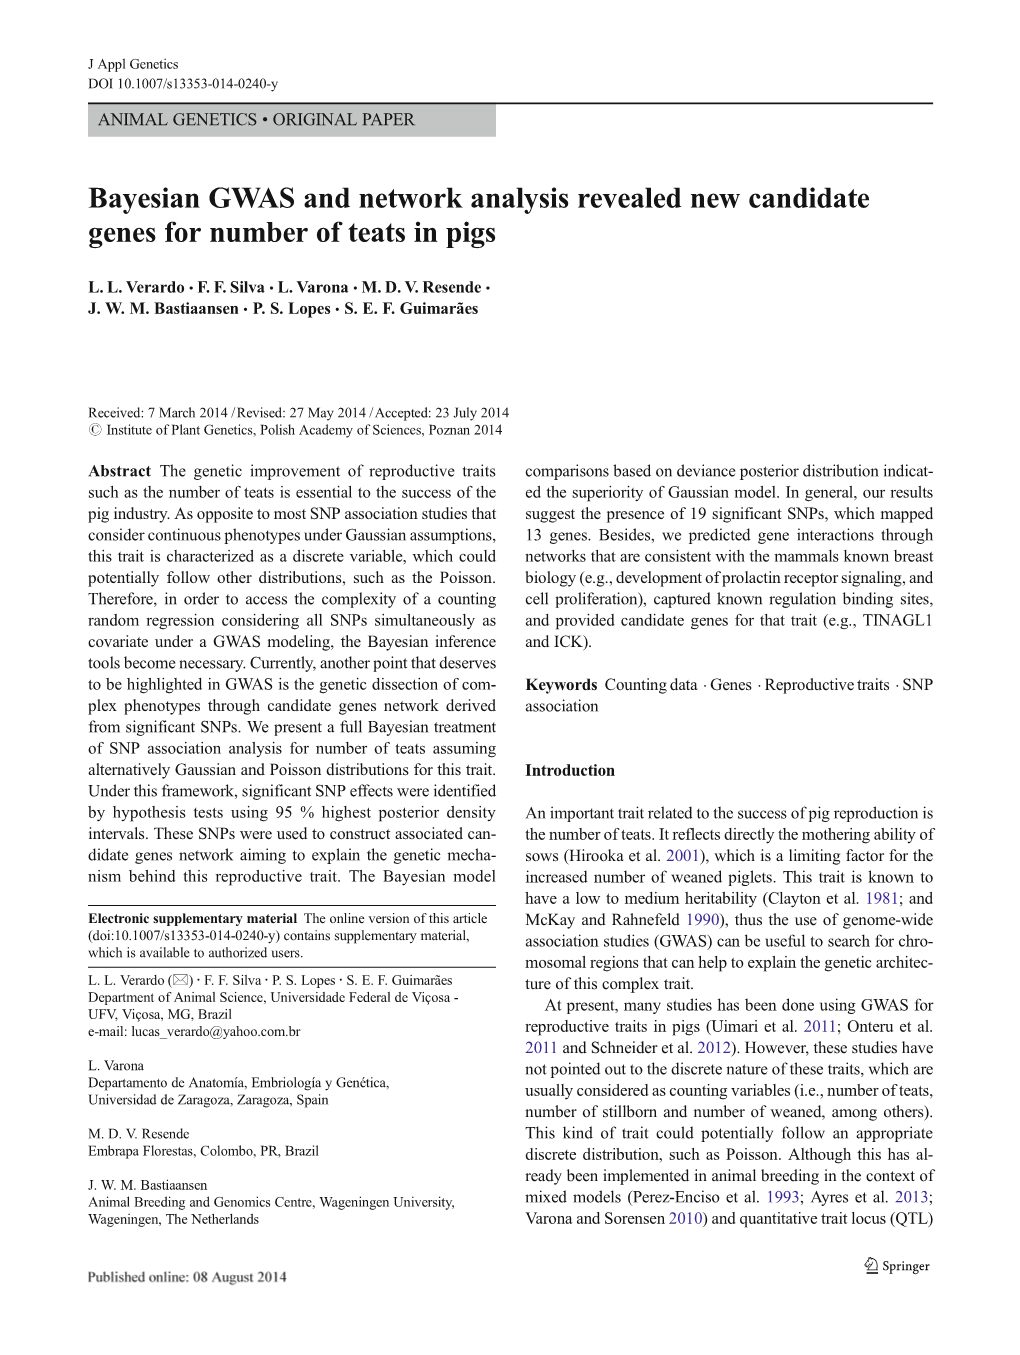 Bayesian GWAS and Network Analysis Revealed New Candidate Genes for Number of Teats in Pigs